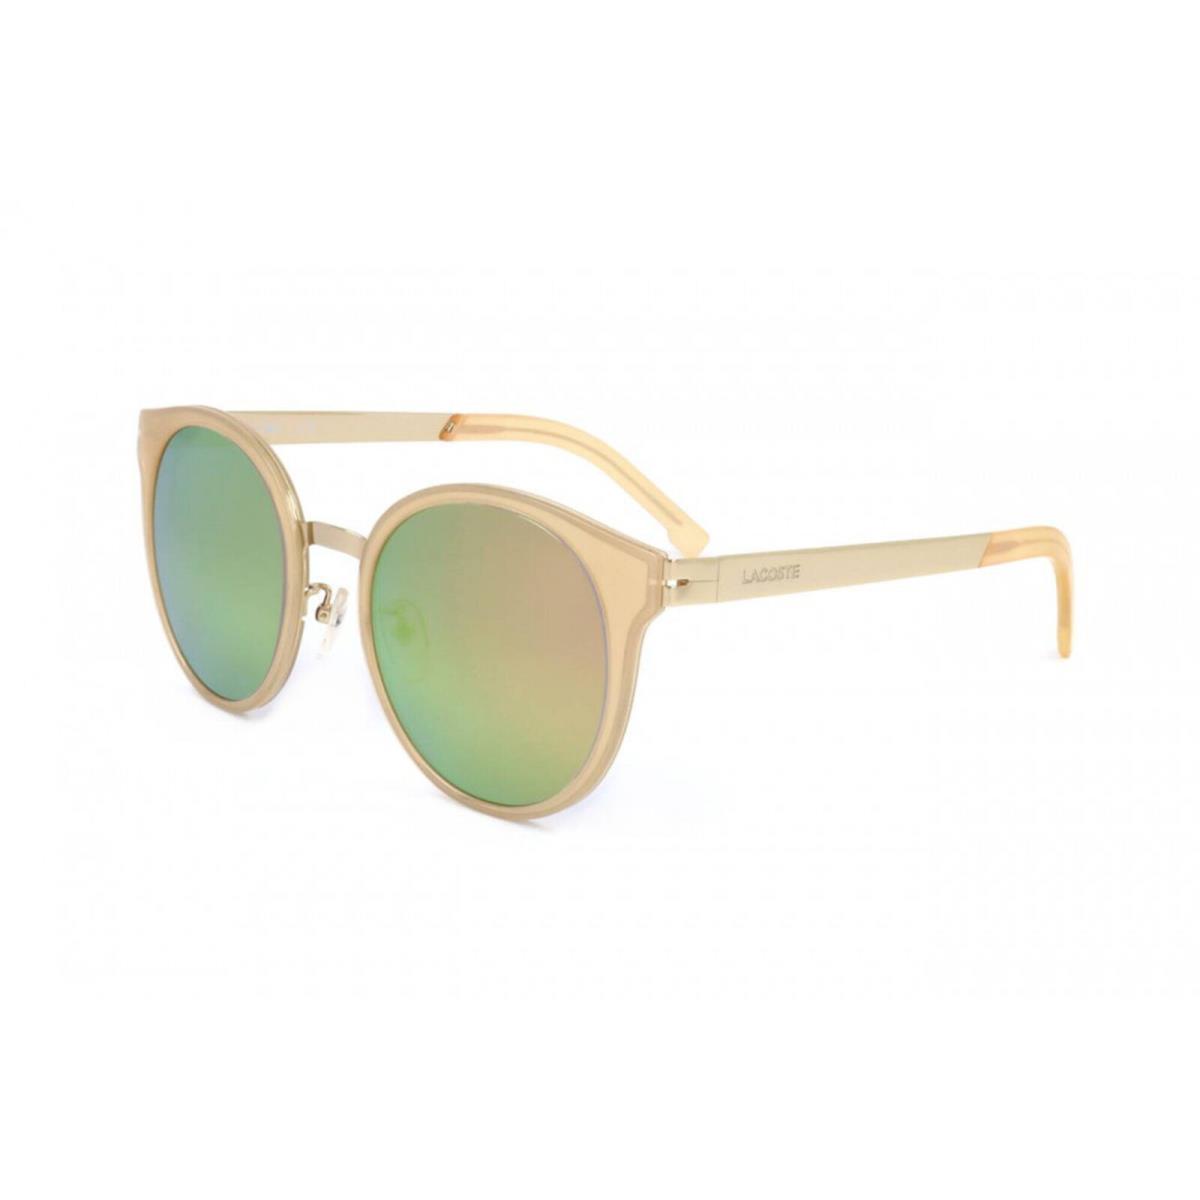 Lacoste Unisex Sunglasses Mirrored Lens Beige and Gold Round Lacoste L845SK 264